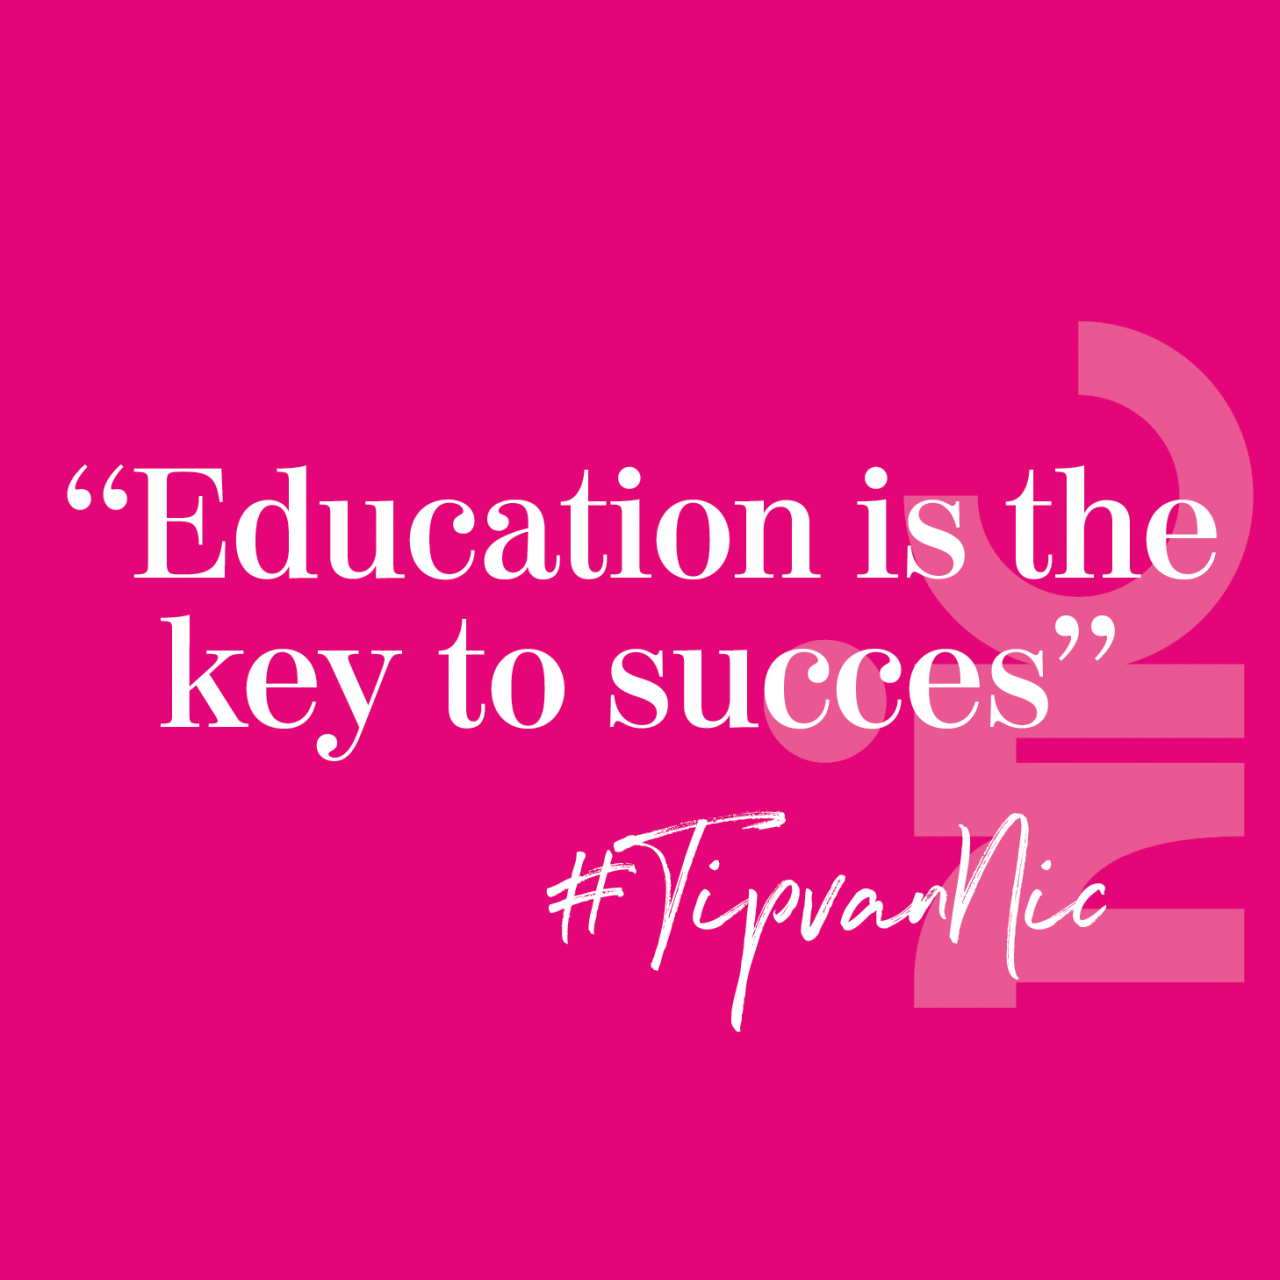 Education is the key to succes!